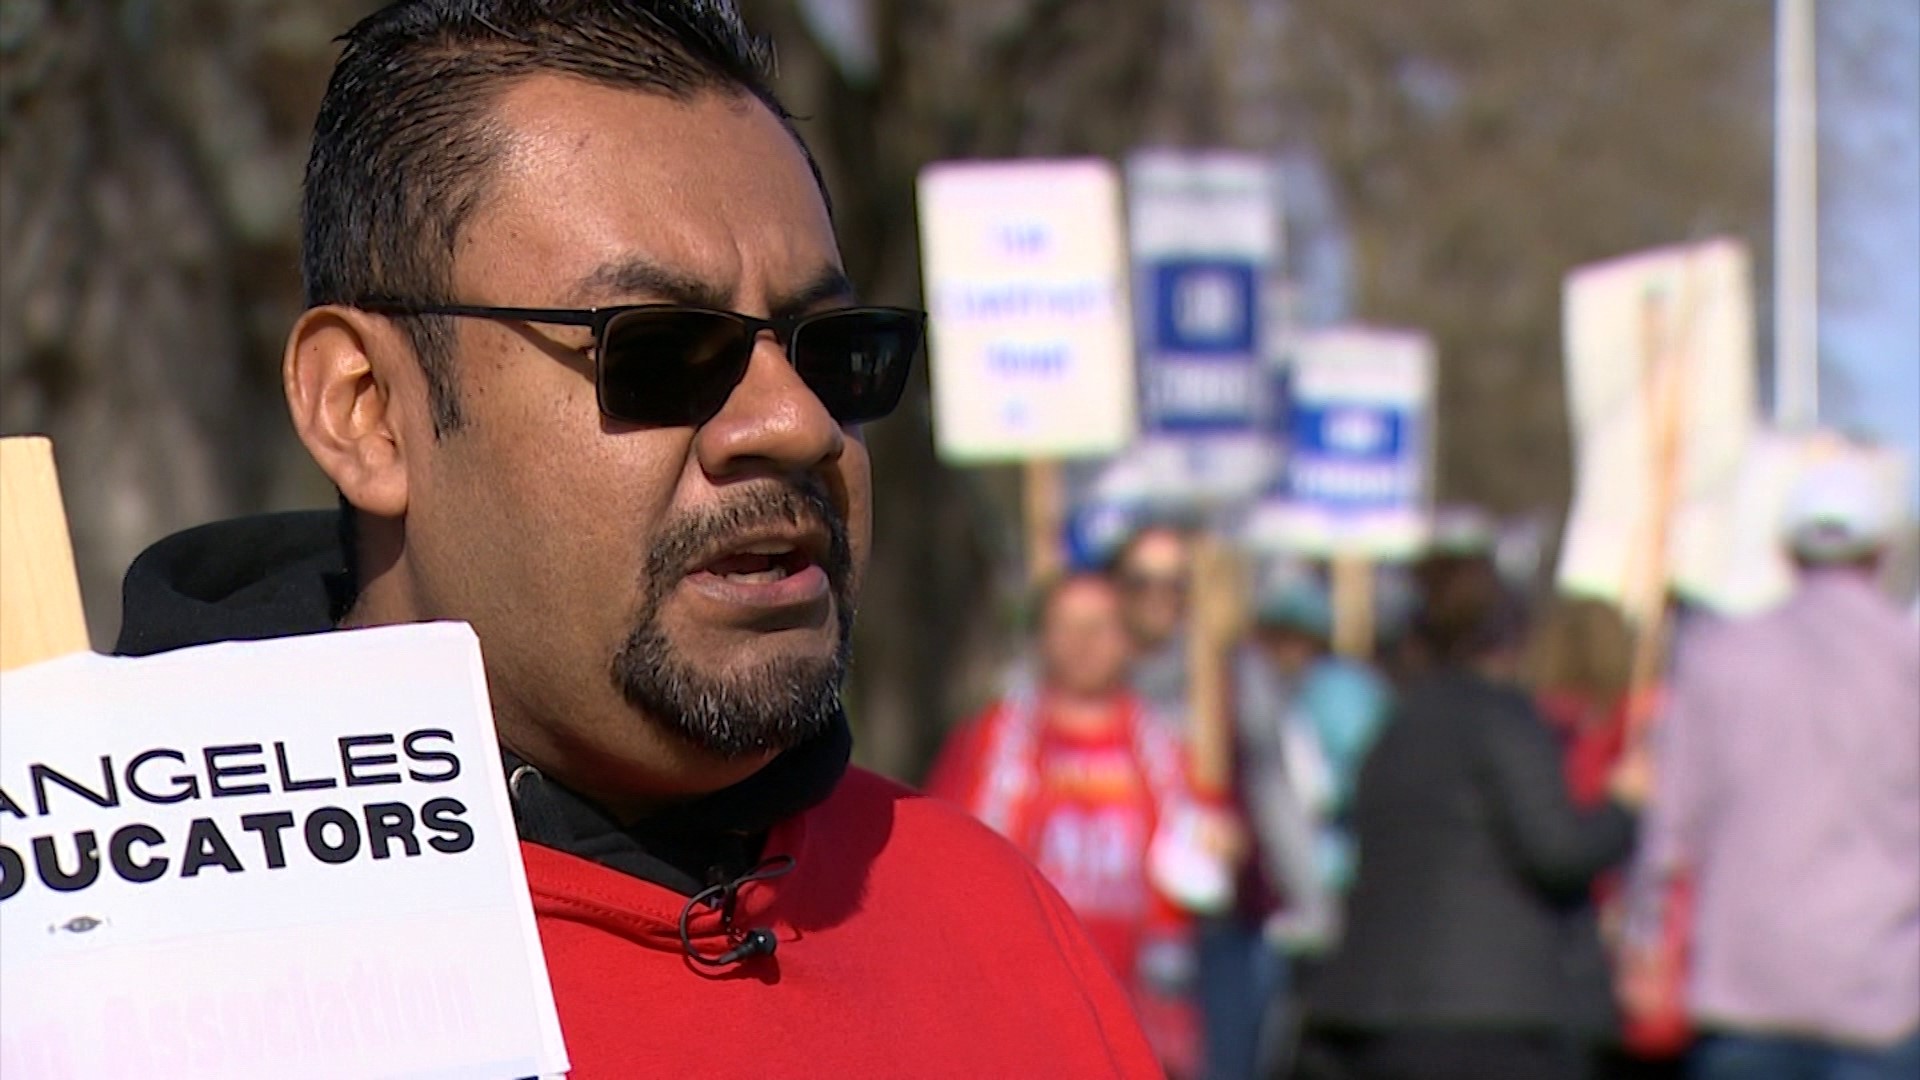 Paraeducators in the school district have been on strike since Monday.